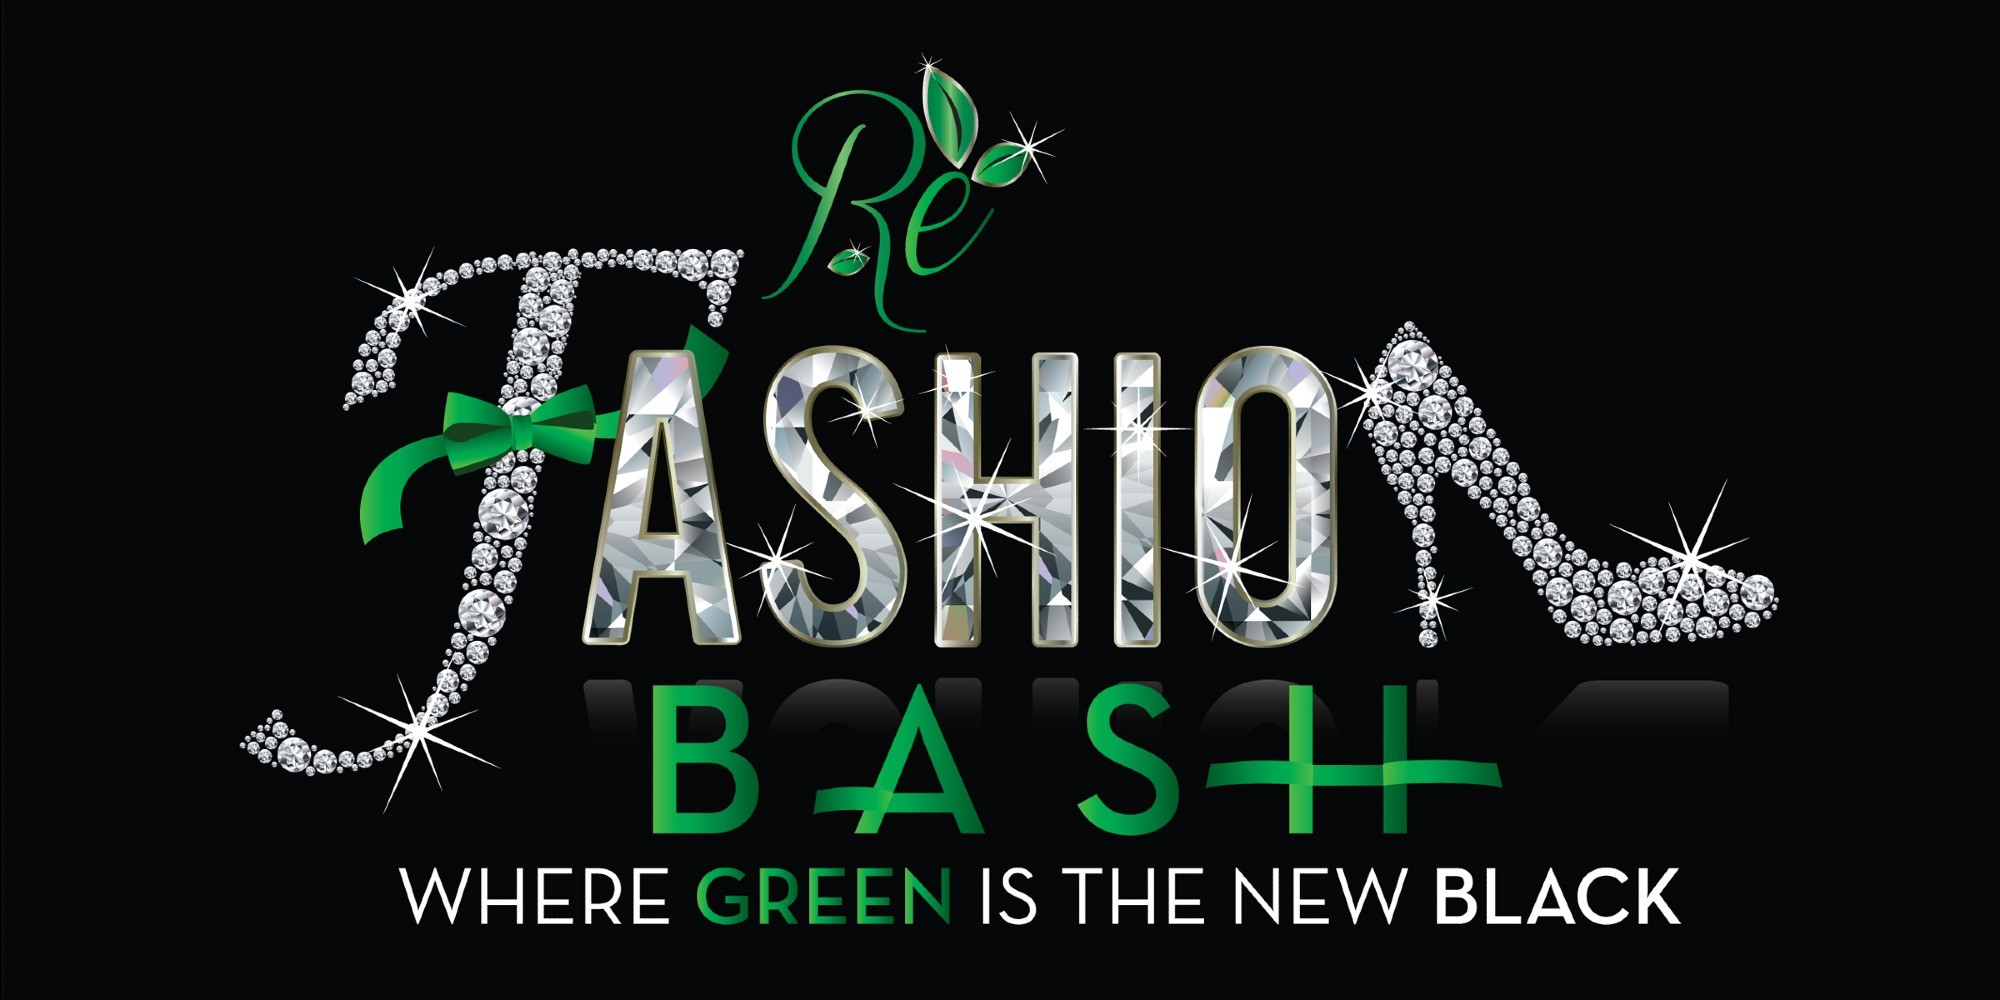 2021 Re-Fashion Bash "Where Green is the New Black"